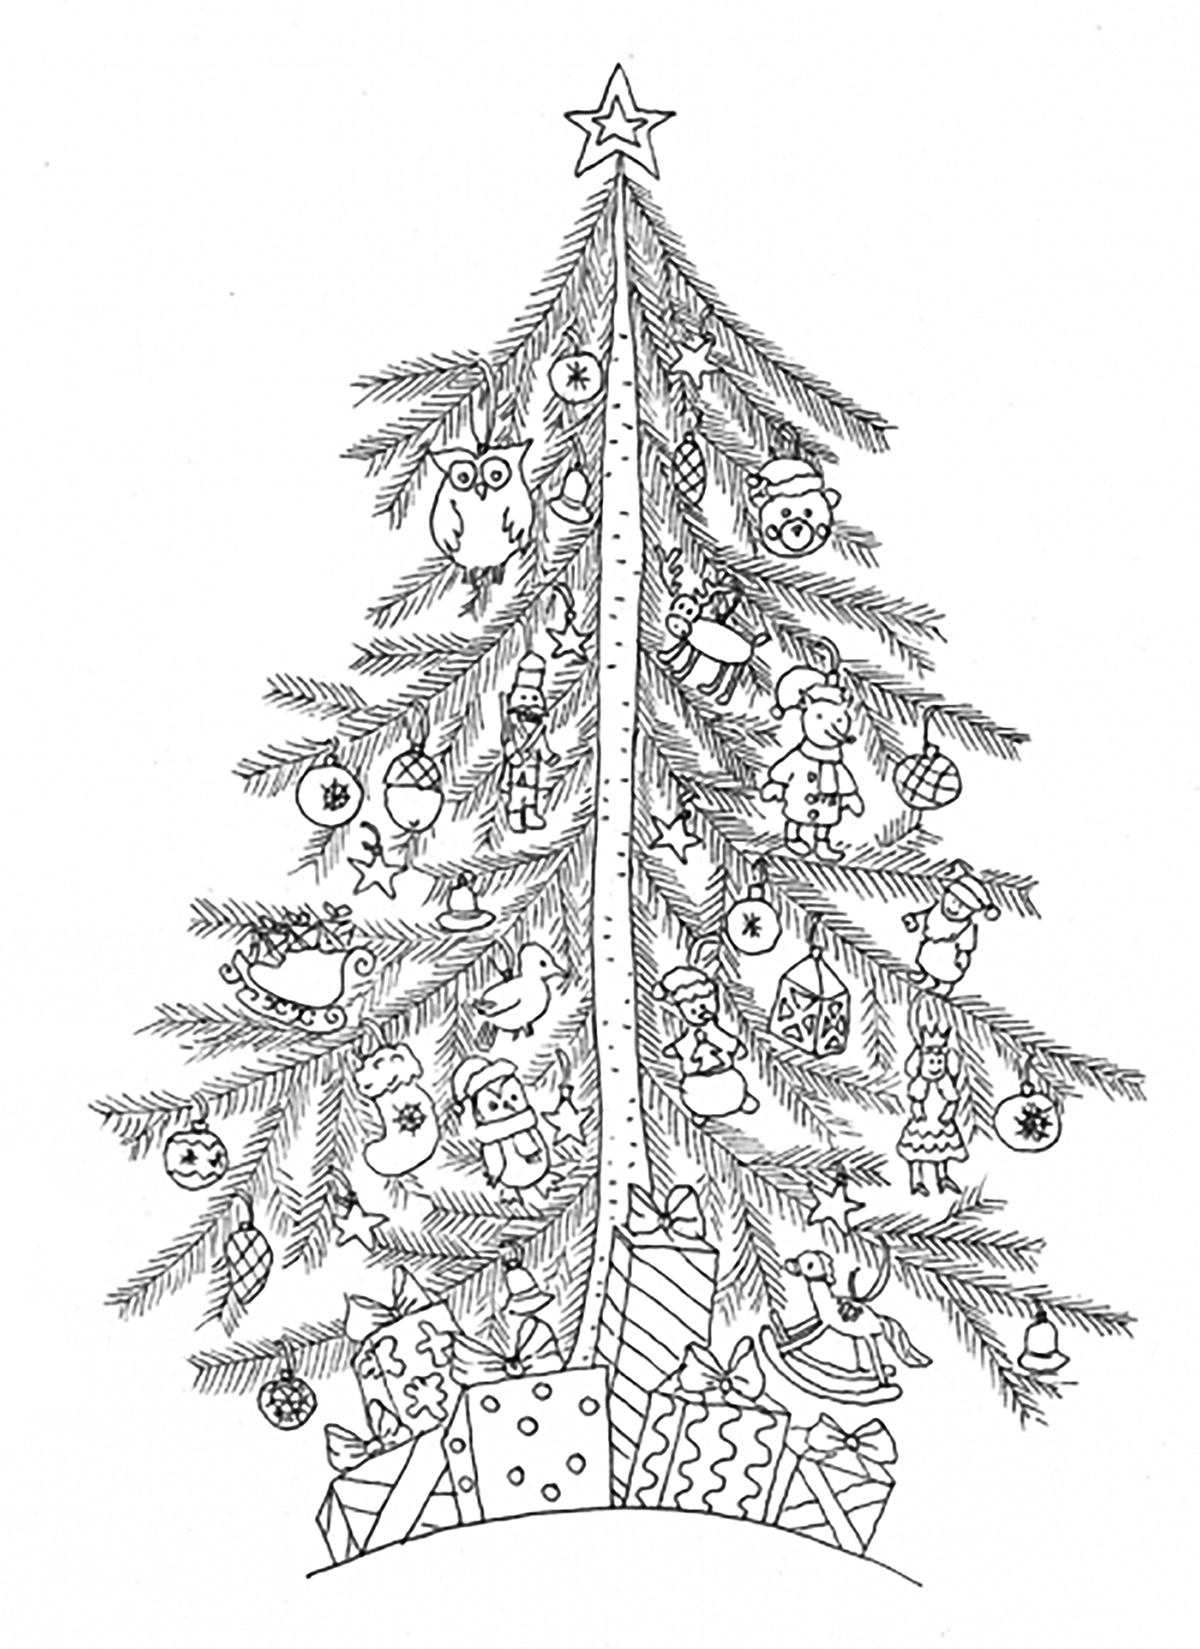 Download Tree Coloring pages - Coloring pages for adults | JustColor